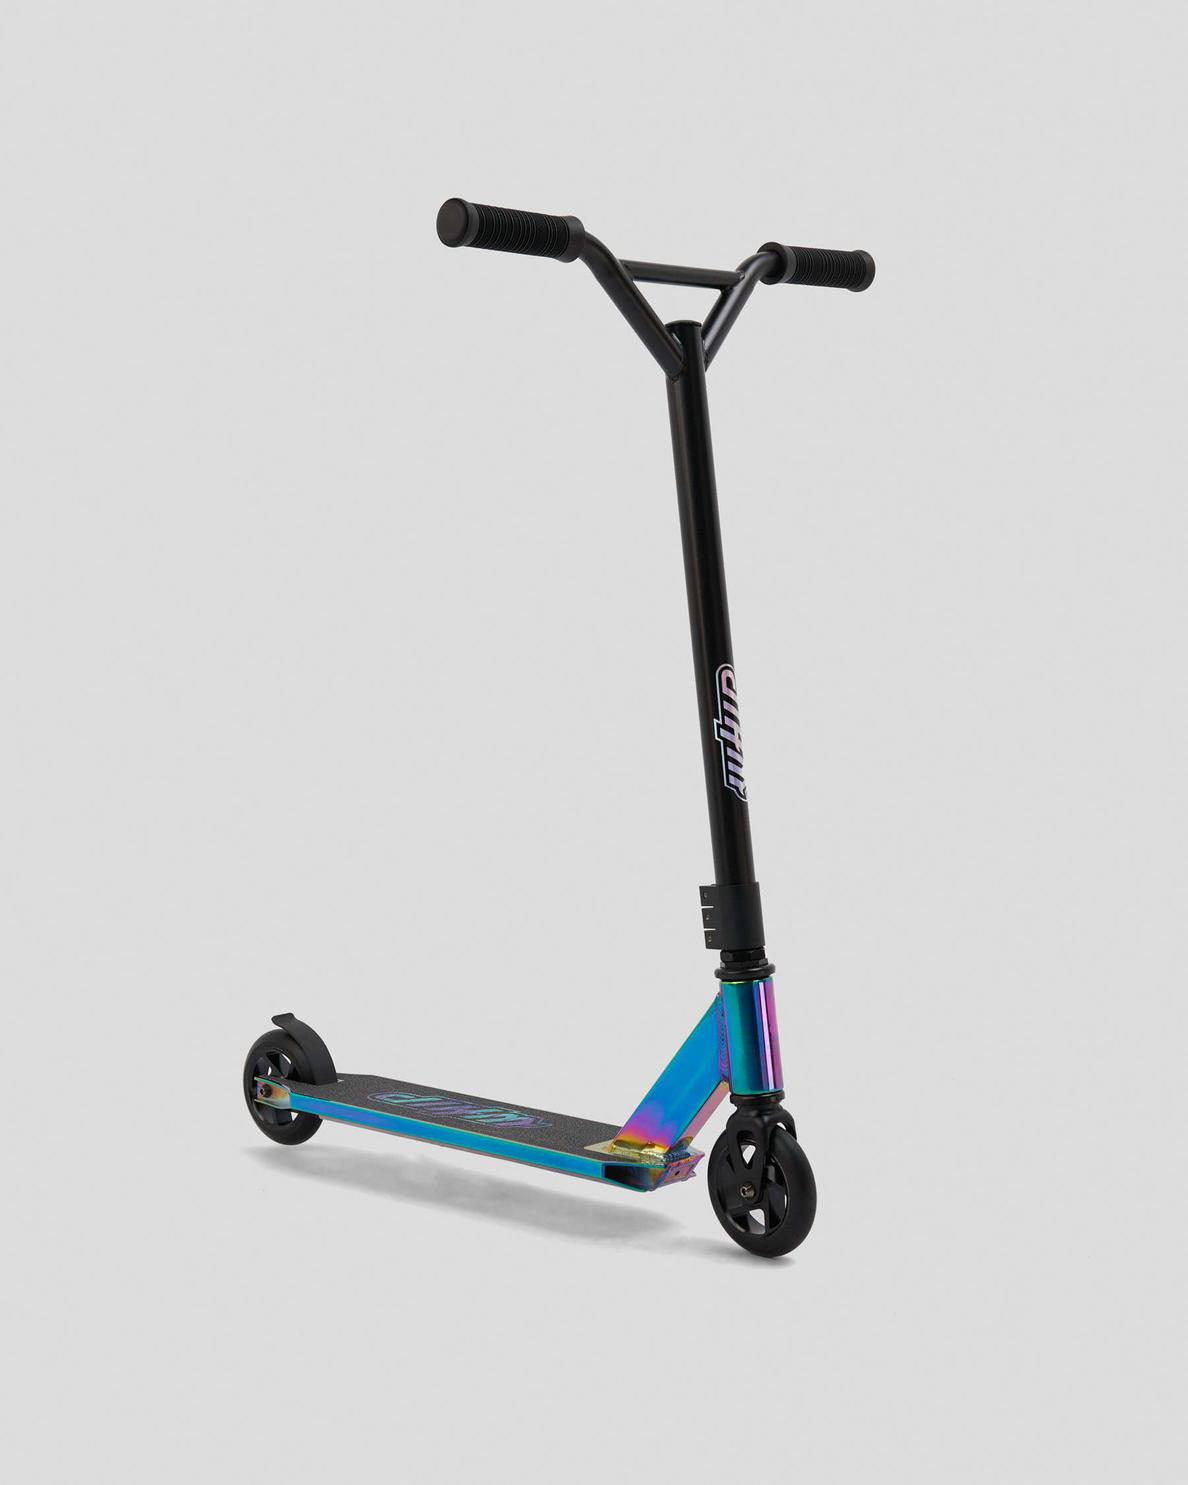 Dazed Scooter offers at $159.99 in City Beach